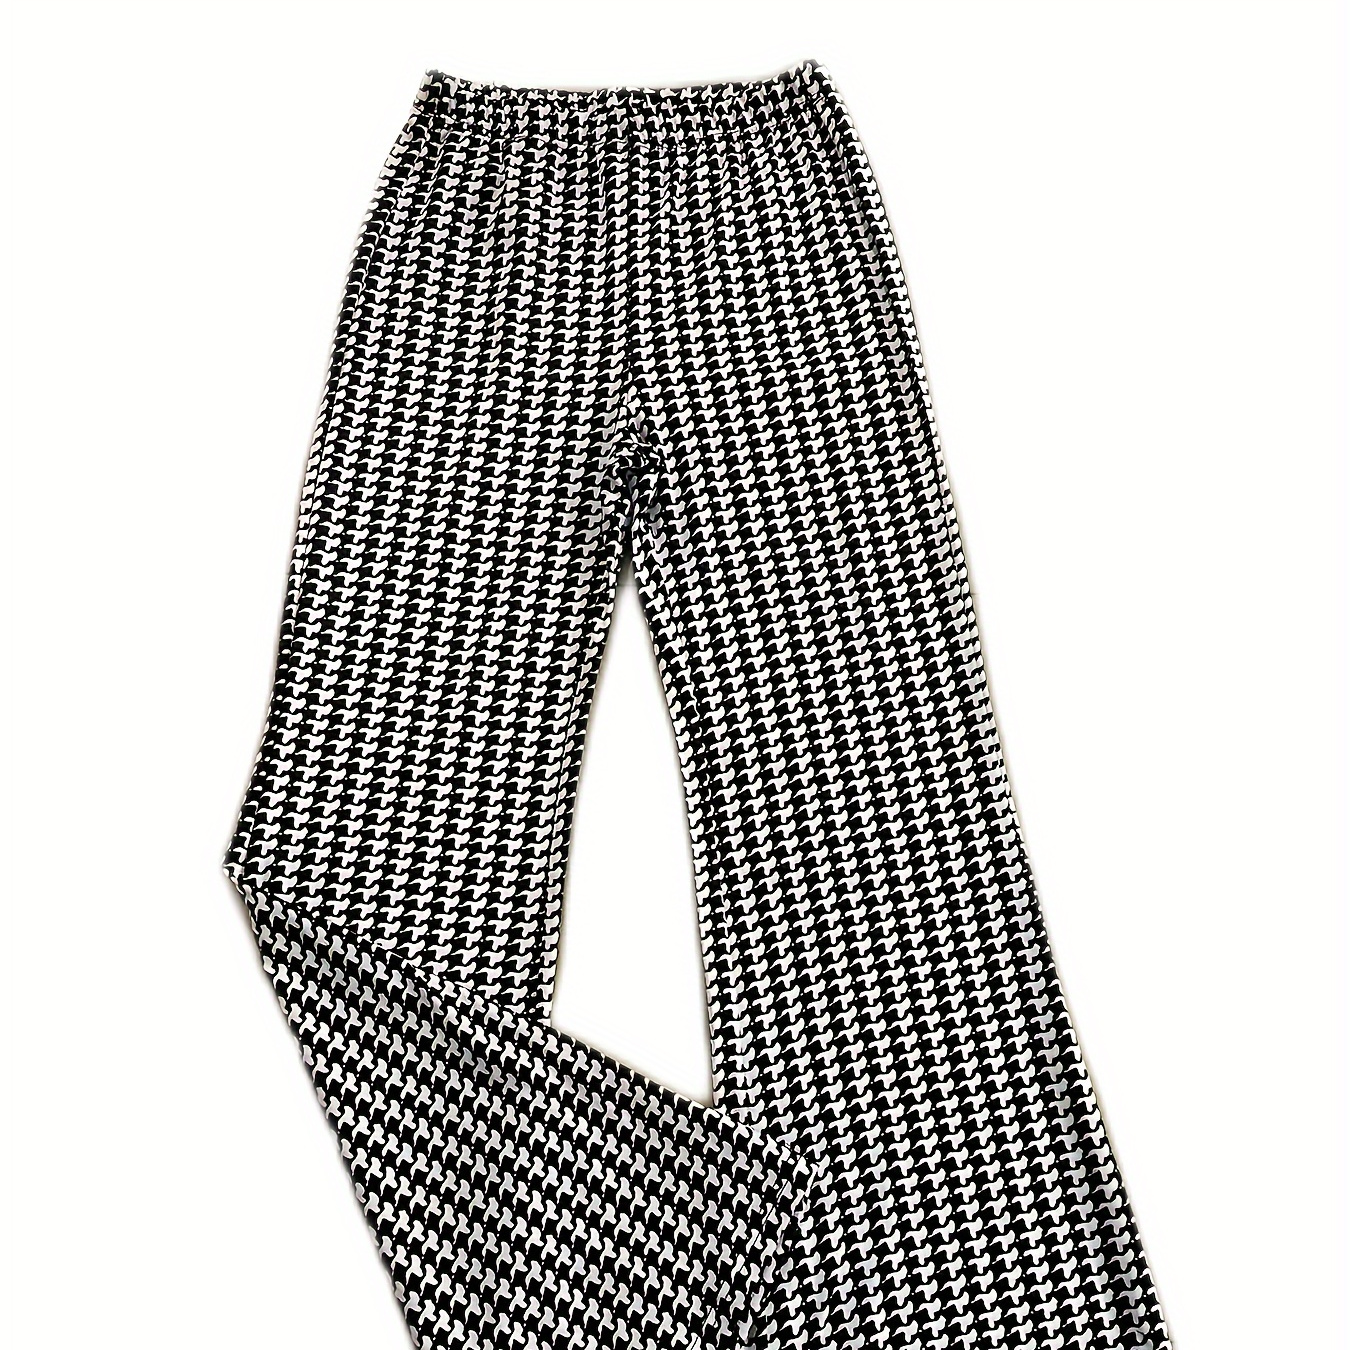 

Houndstooth Print Flare Leg Pants, Casual High Waist Forbidden Pants For Spring & Summer, Women's Clothing